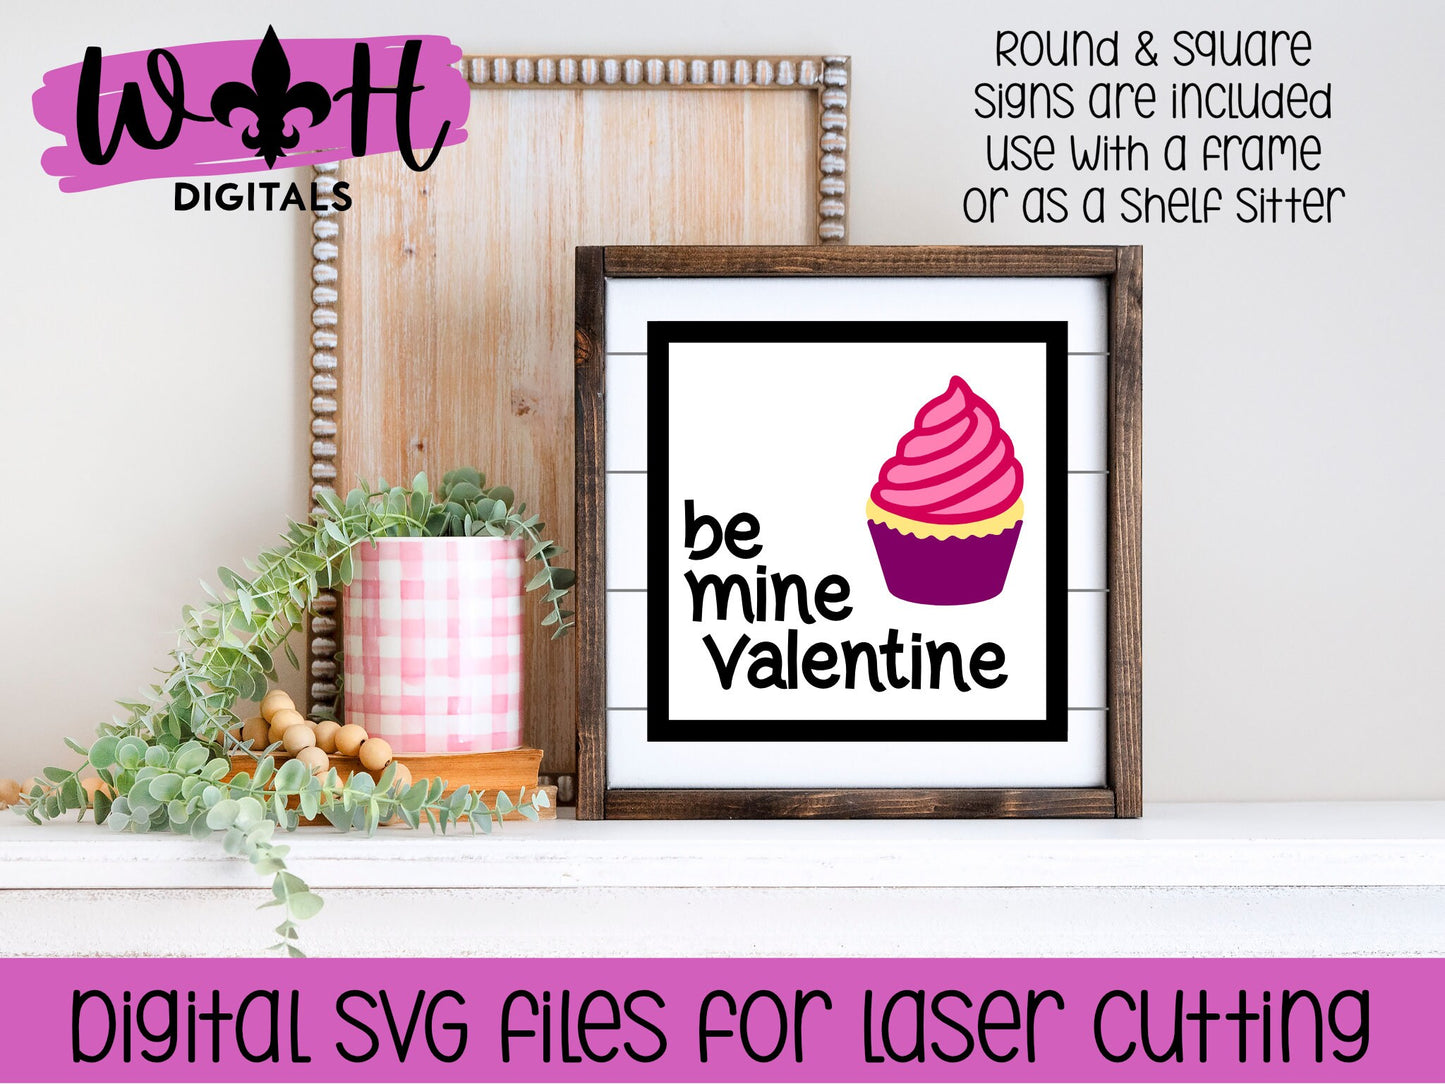 Be Mine Valentine Cupcake Shiplap Shelf Sitter - Round and Square Frames - Files for Sign Making - SVG Cut File For Glowforge - Digital File